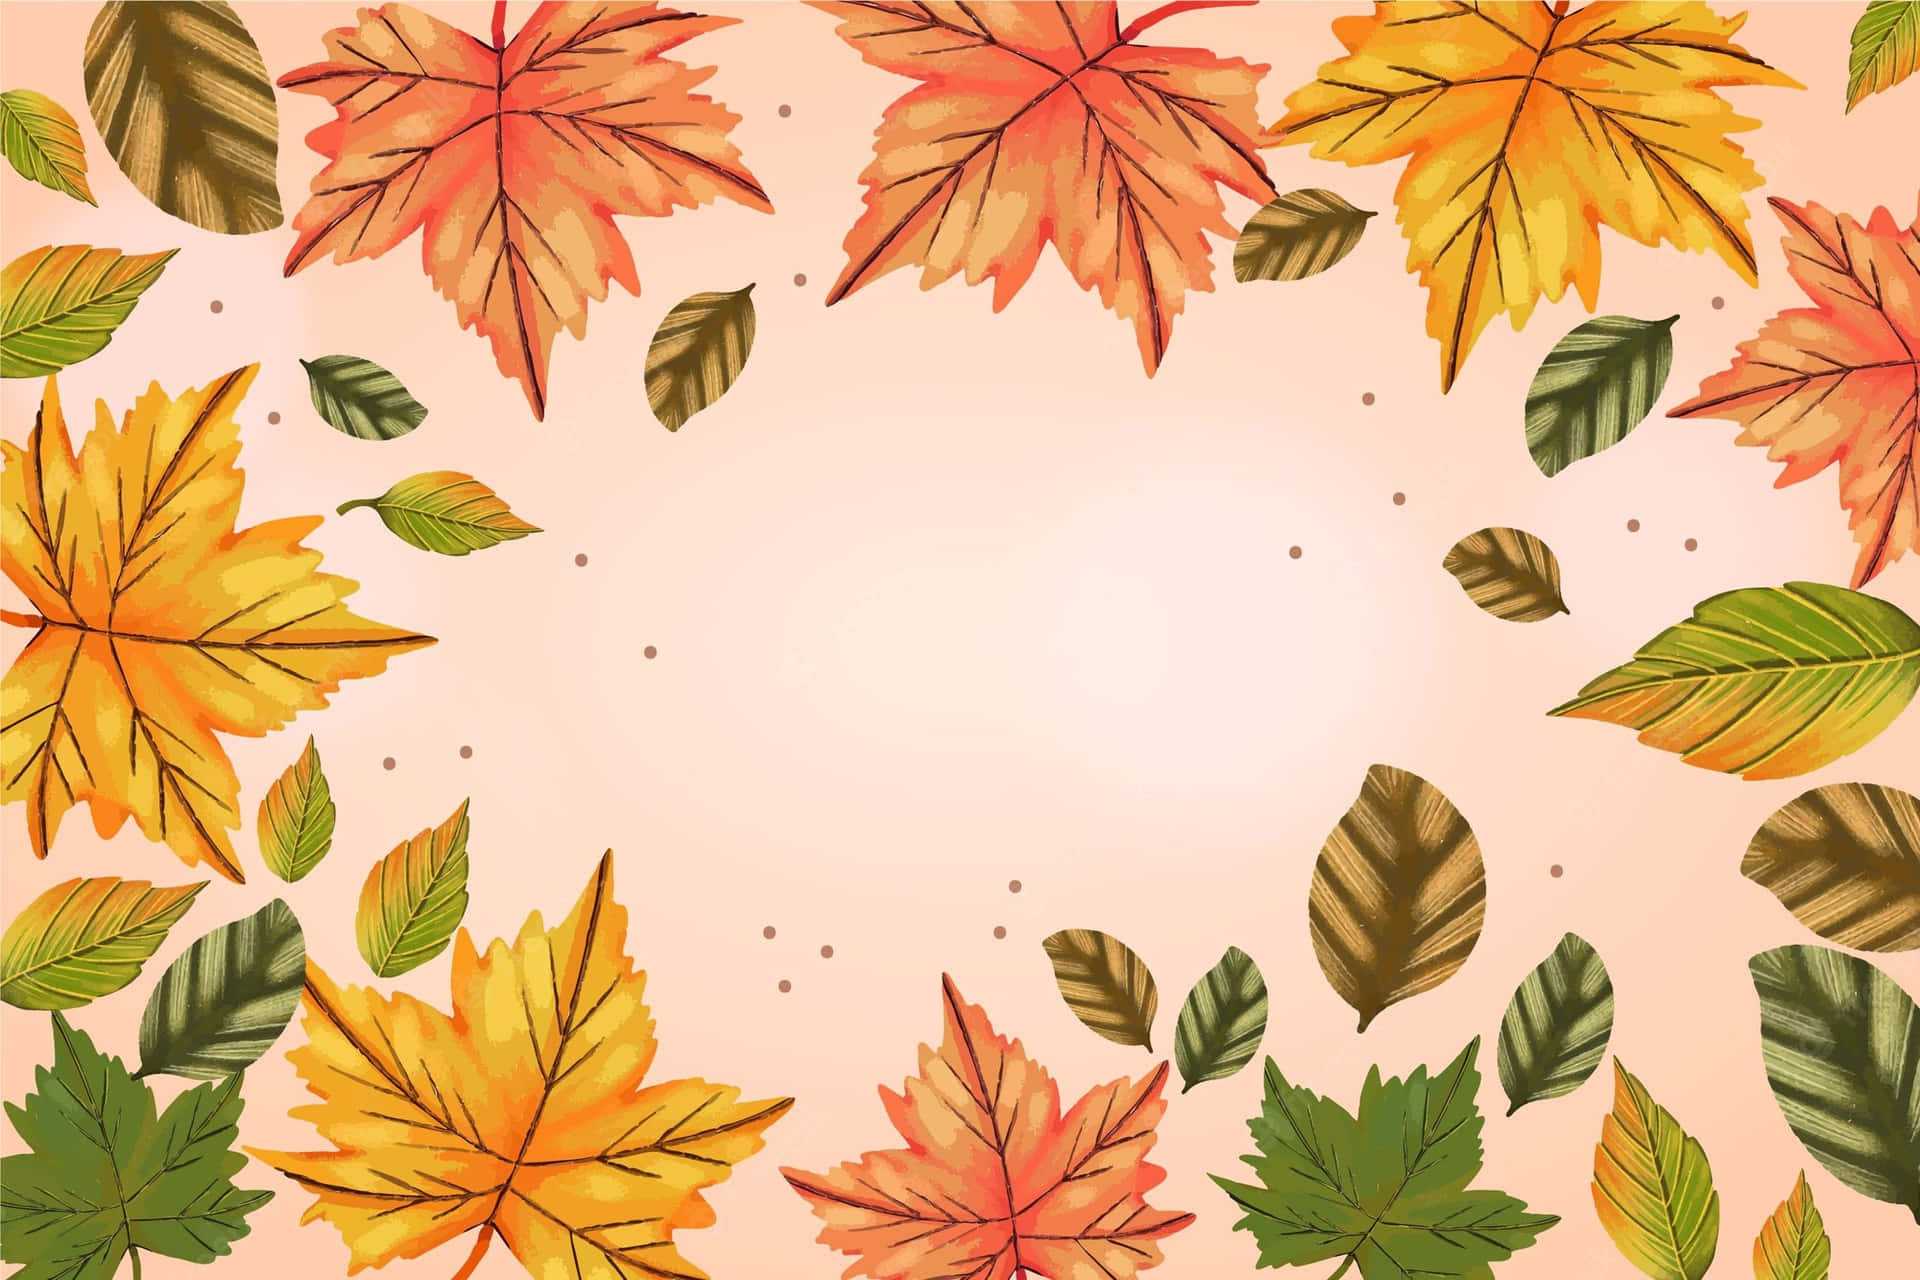 Autumn Leaves Background With Autumn Leaves Wallpaper